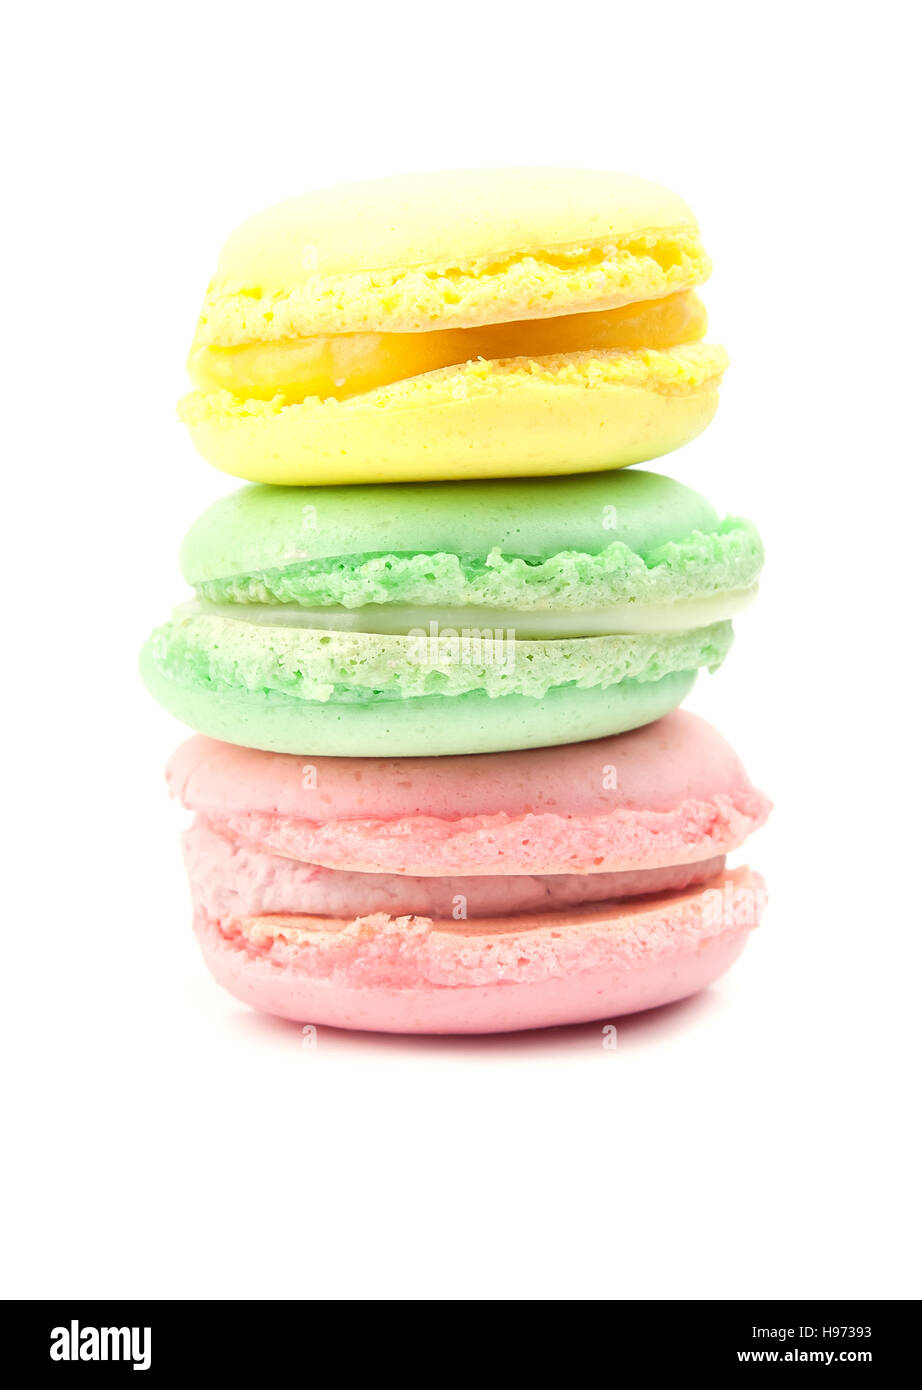 cake macaron or macaroon isolated on white background, sweet and colorful dessert Stock Photo